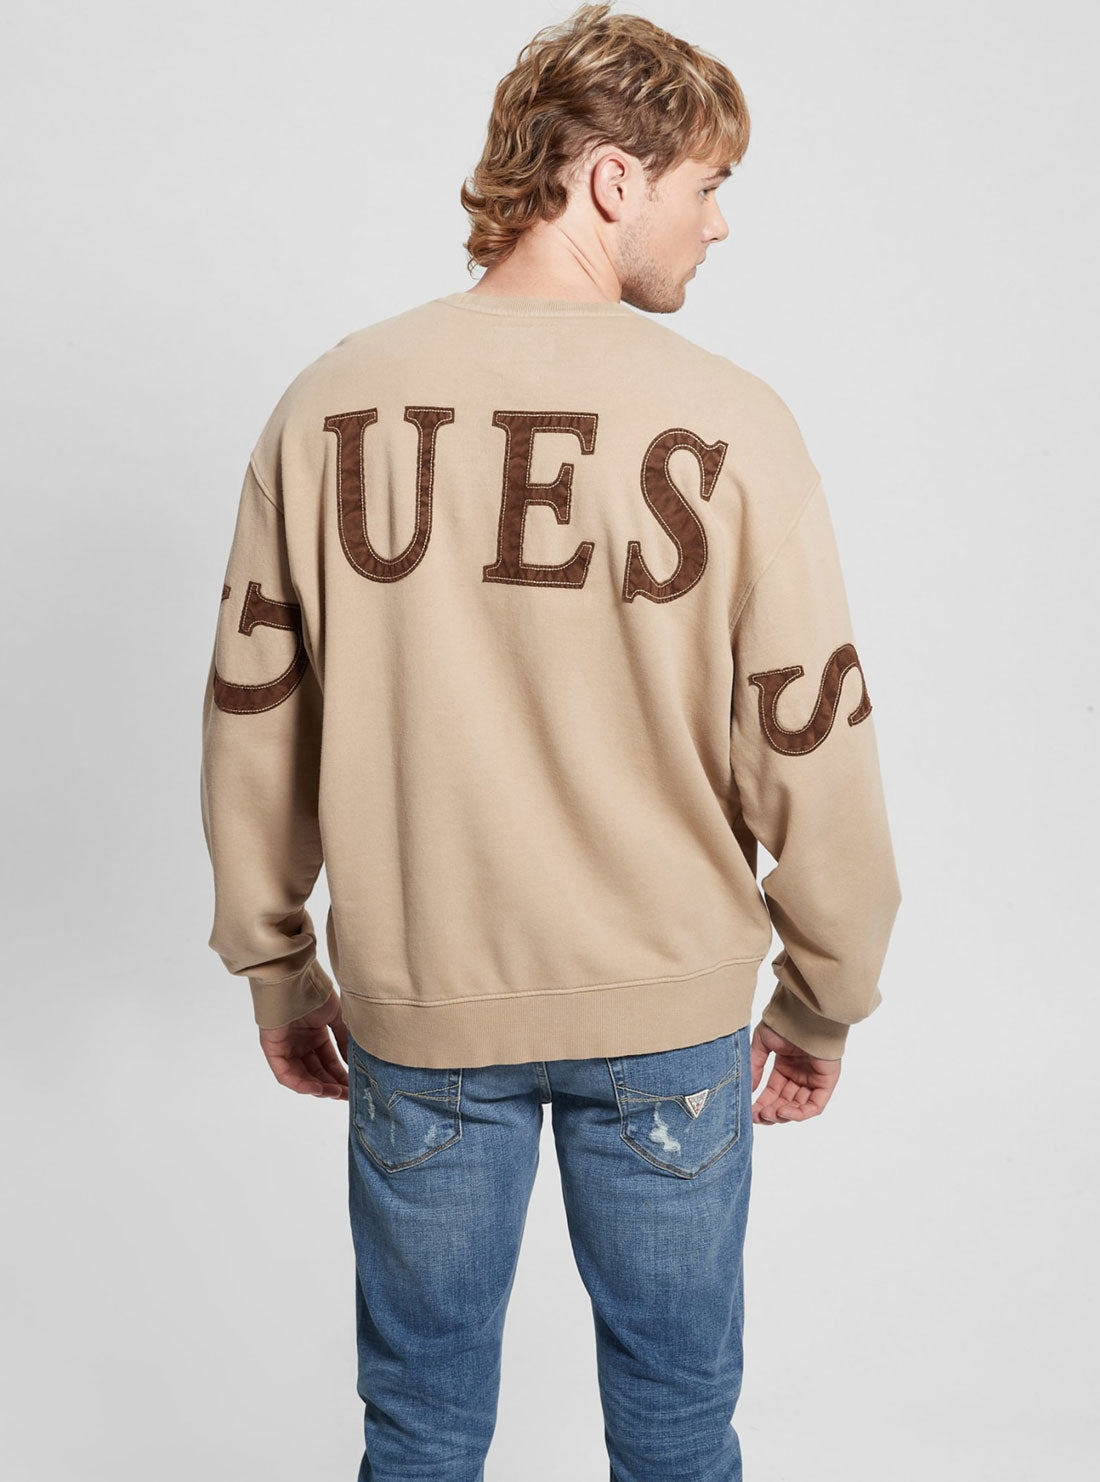 GUESS Beige French Vintage Jumper back view